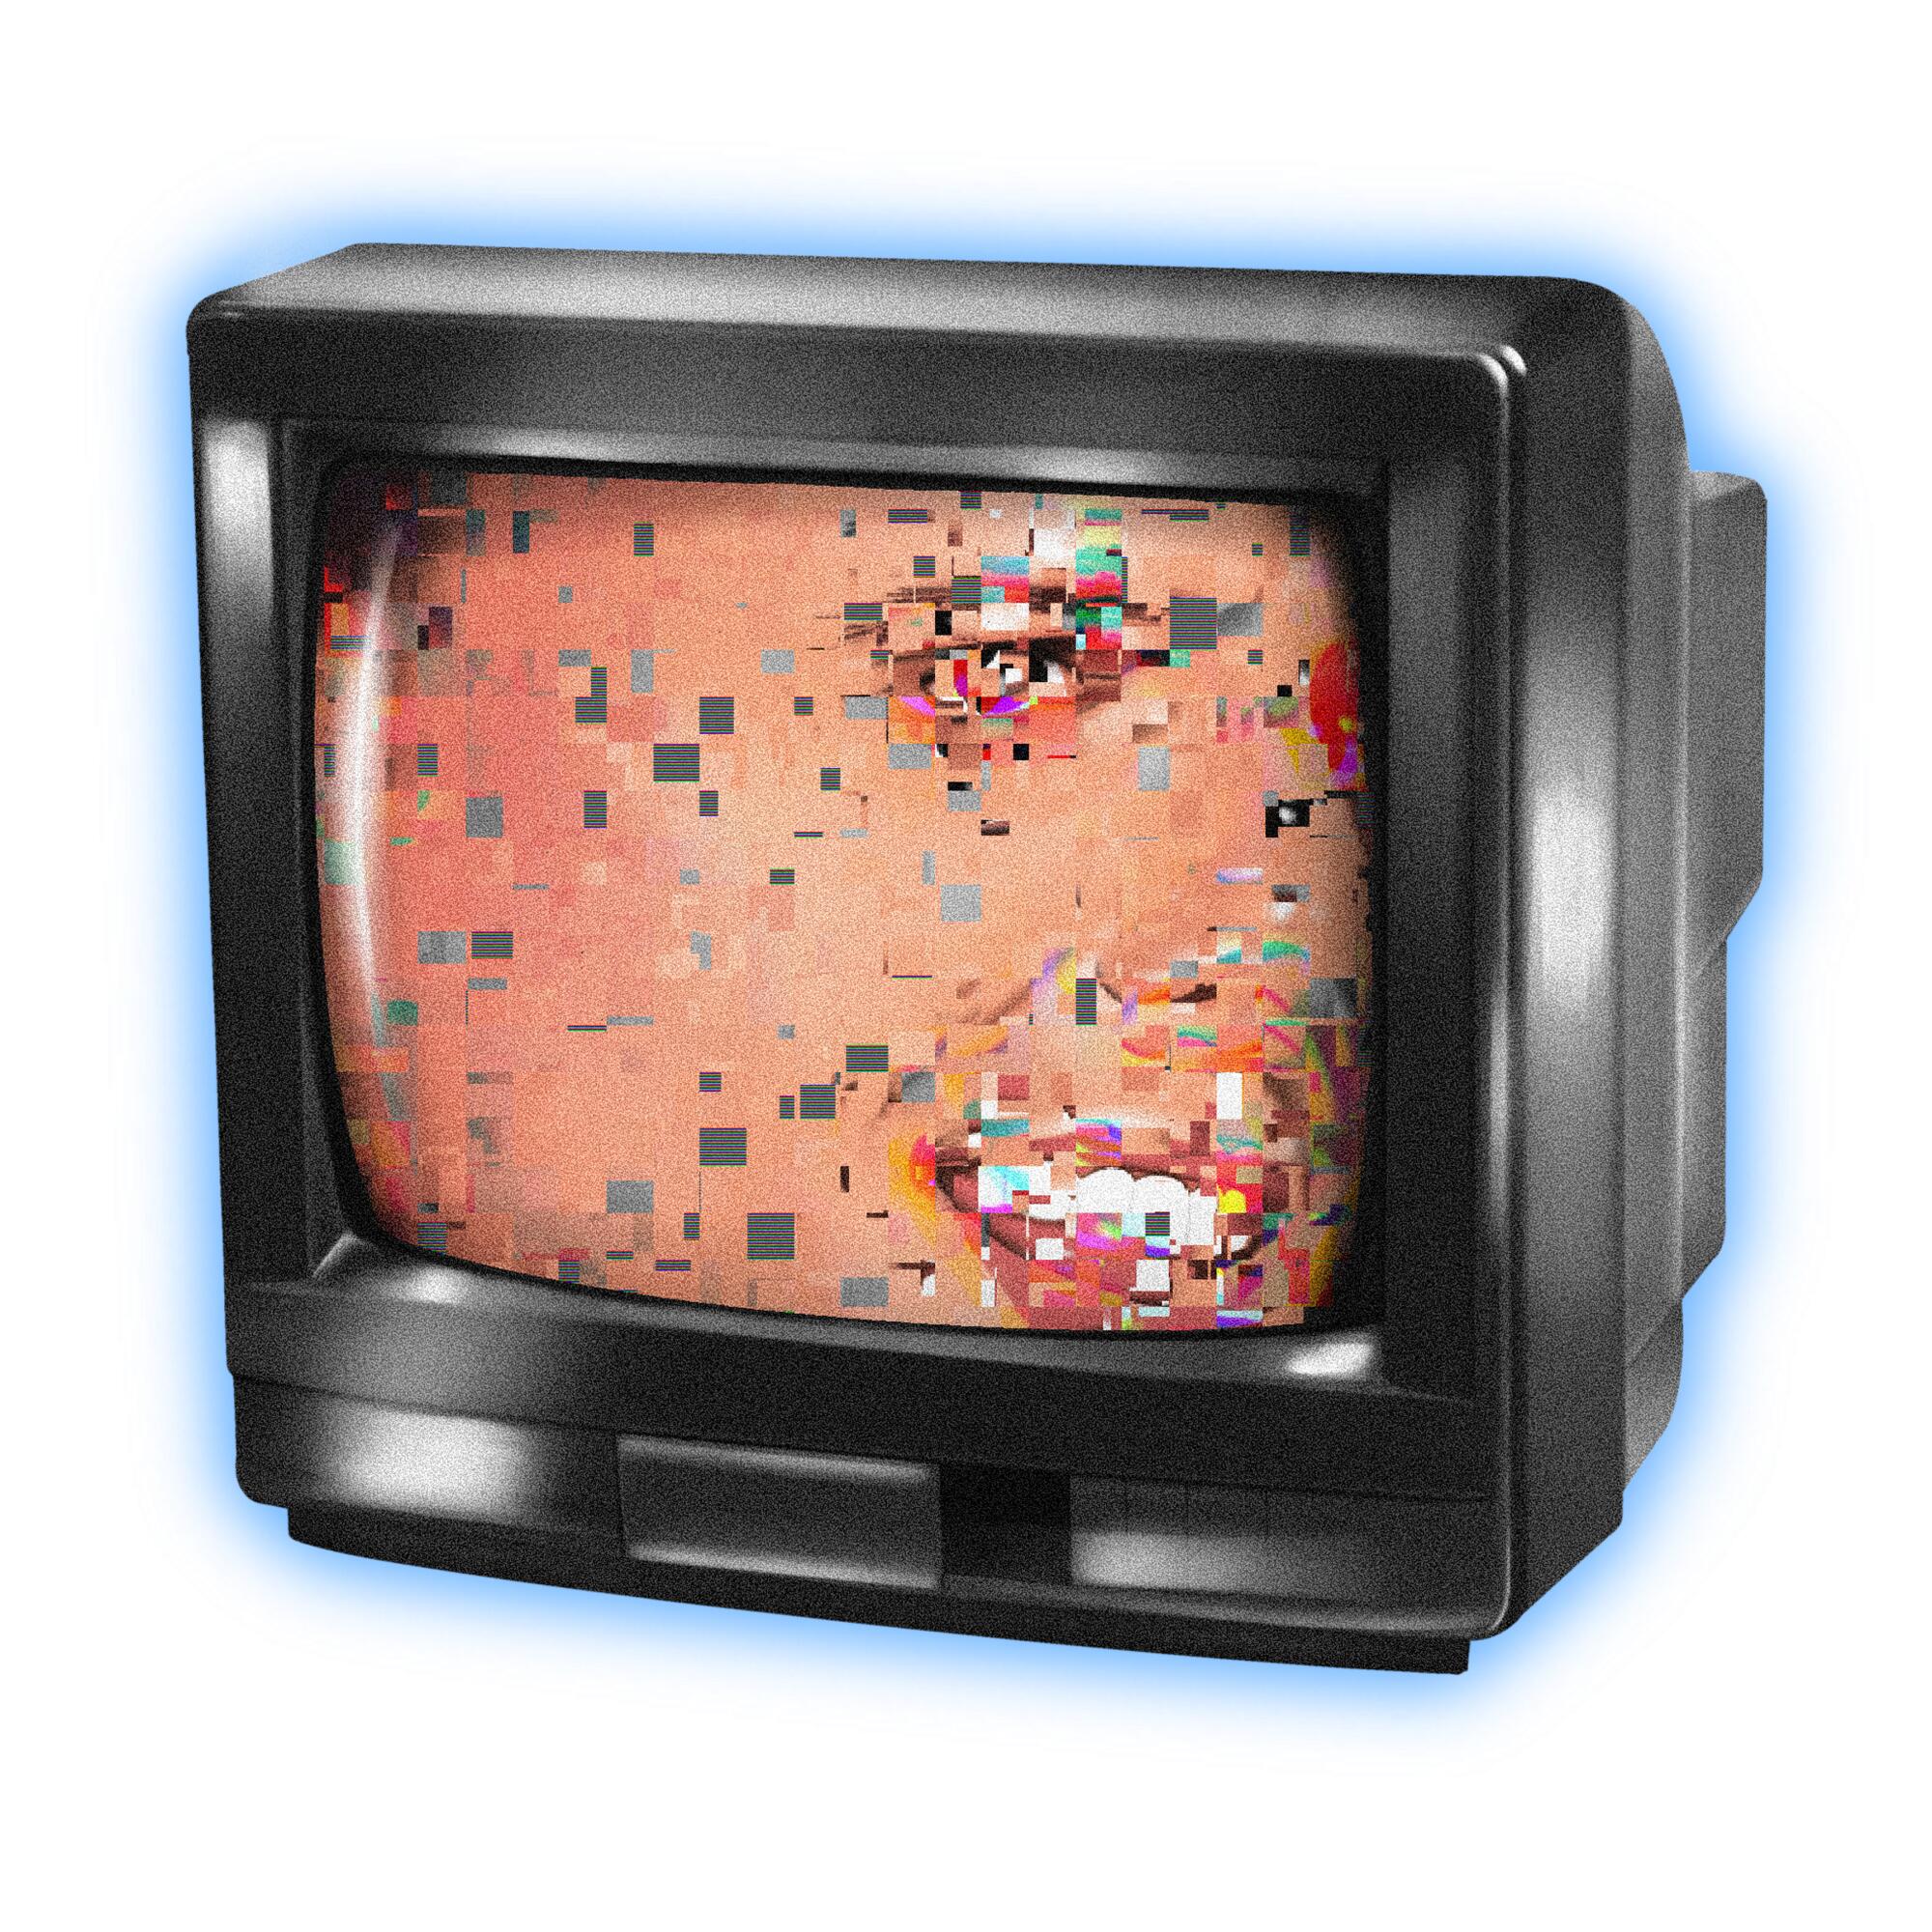 A TV with pixelated face of Luis Miguel 